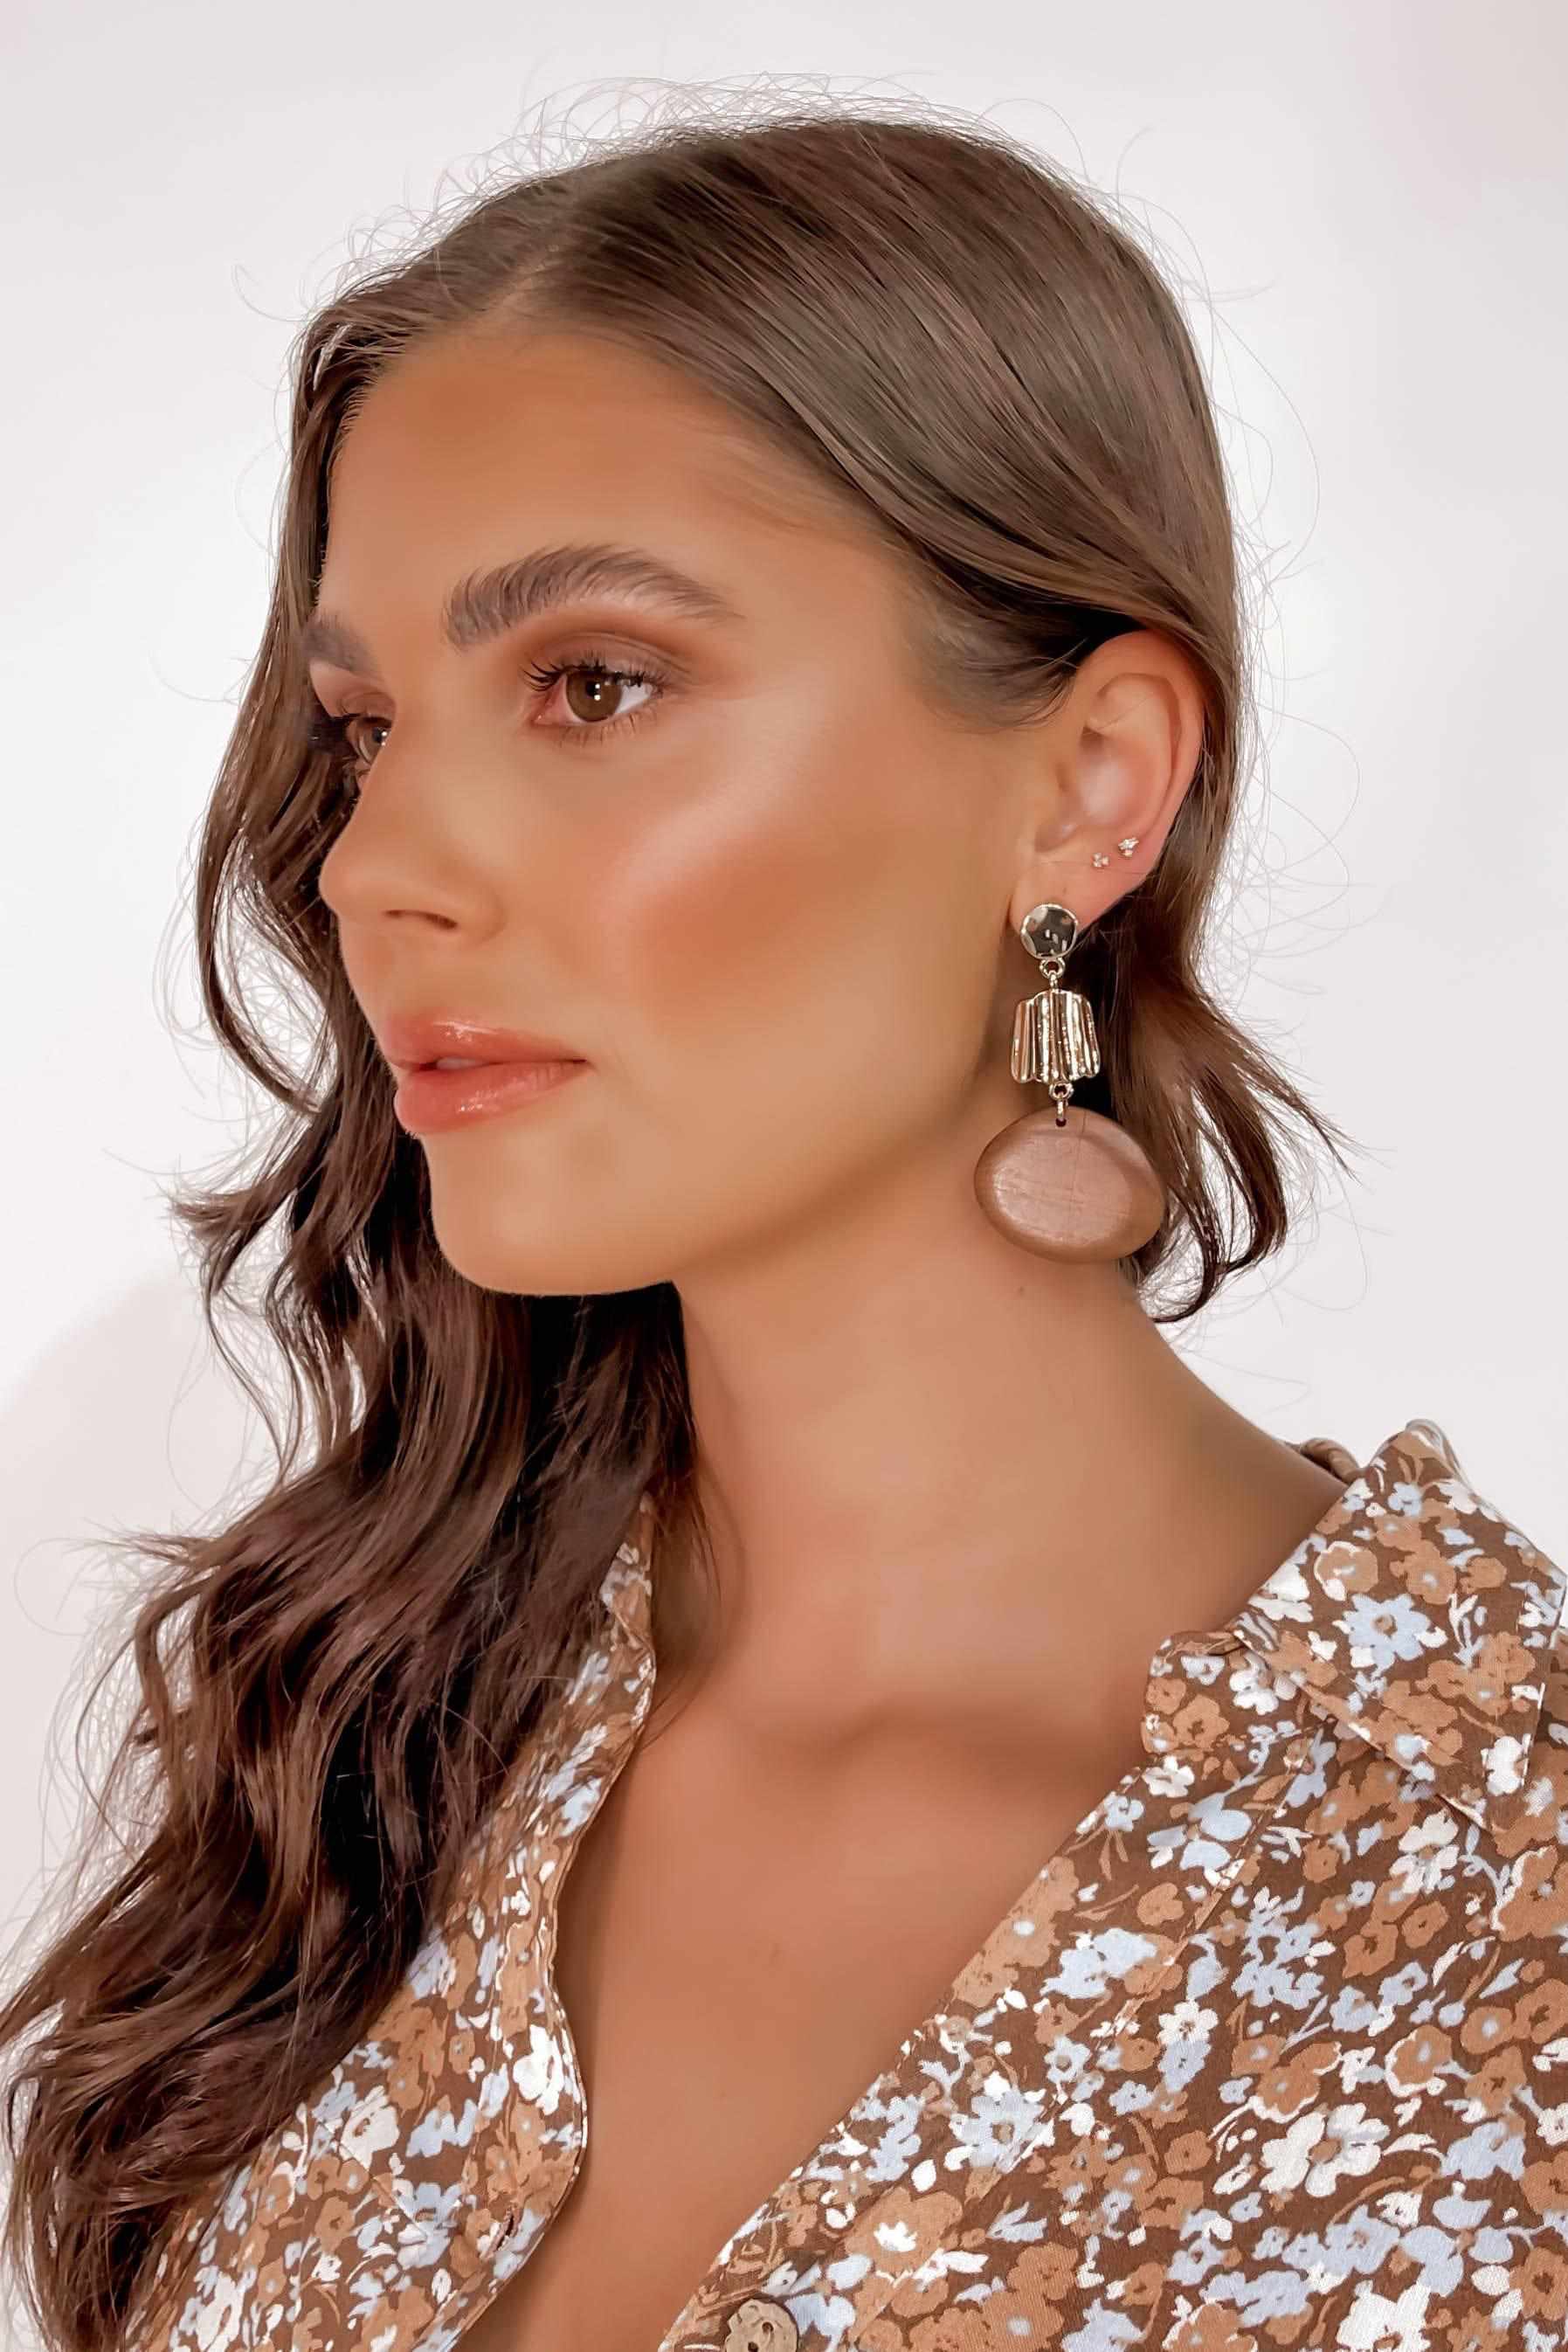 Wild Love Earrings, ACCESSORIES, EARRINGS, GOLD, JEWELLERY, Our New Wild Love Earrings Is Now Only $31.00 Exclusive At Mishkah, We Have The Latest Fashion Accessories @ Mishkah Online Fashion Boutique Our New Wild Love Earrings is now only $31.00-MISHKAH